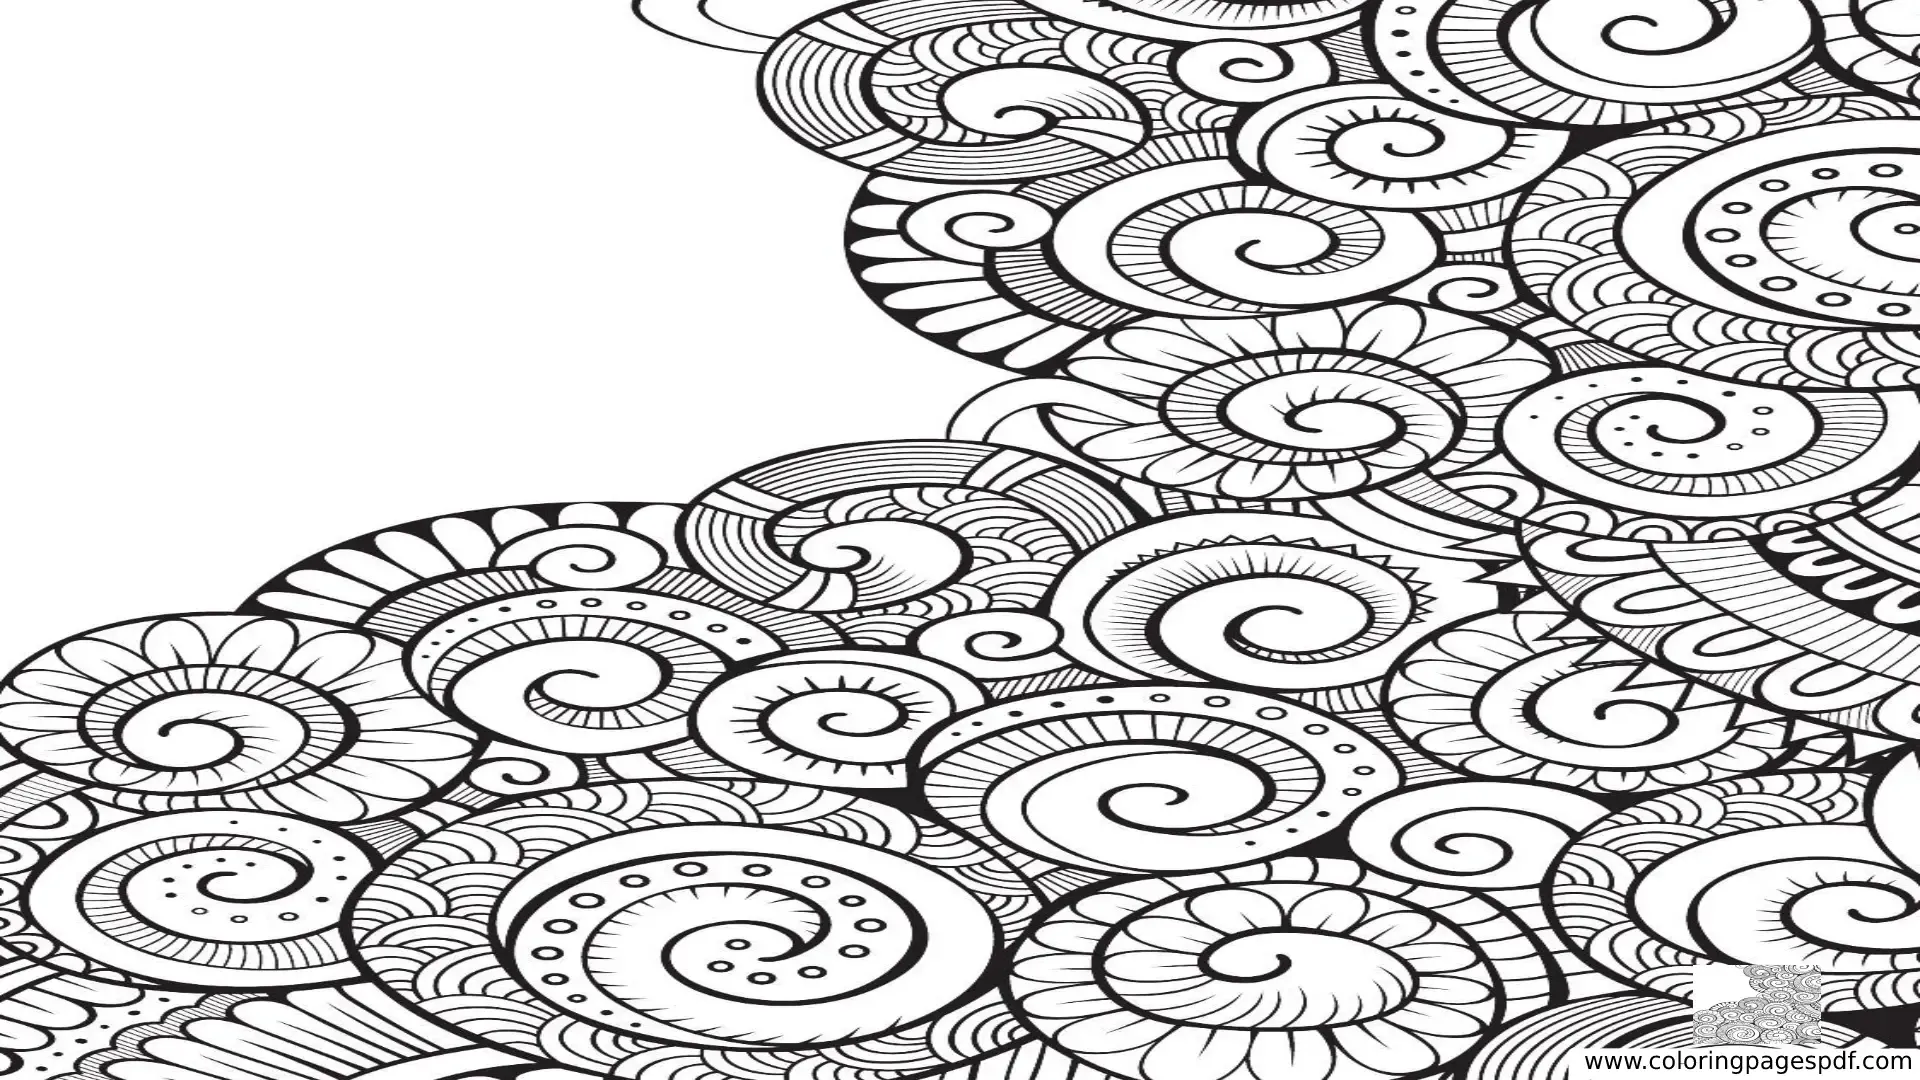 Coloring Pages Of Clouds Mandala